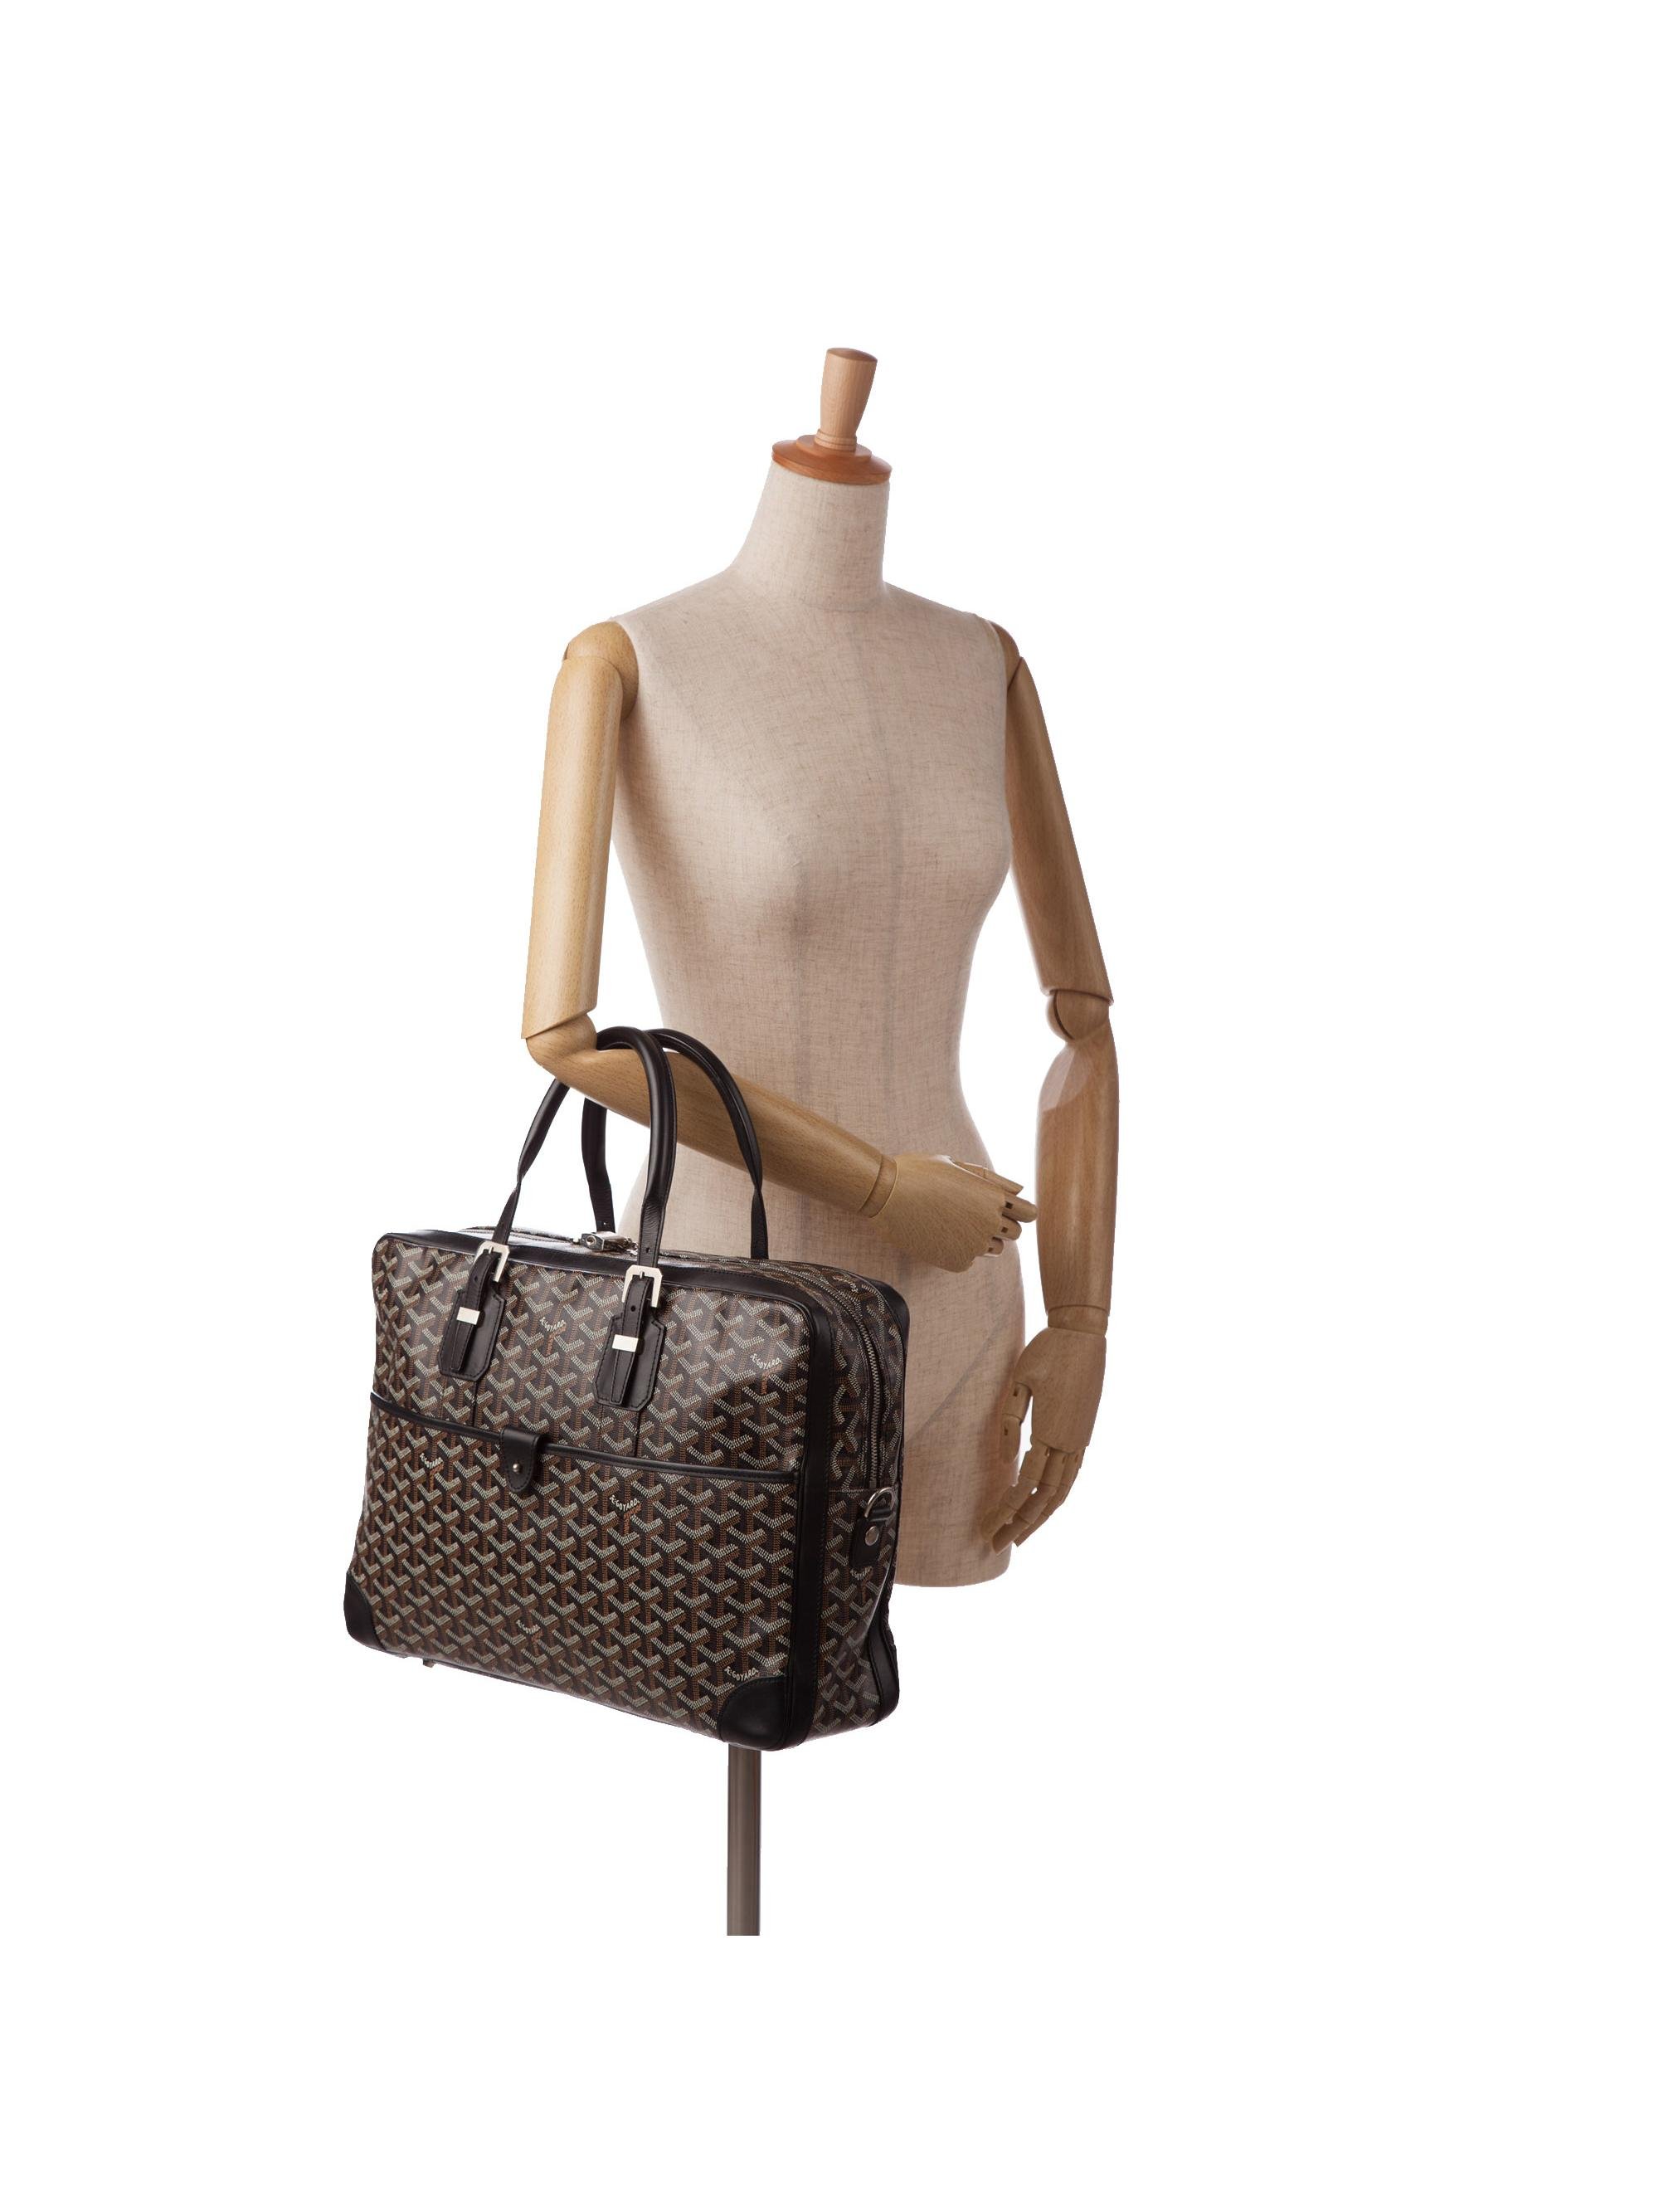 Goyard Women's Clothing On Sale Up To 90% Off Retail